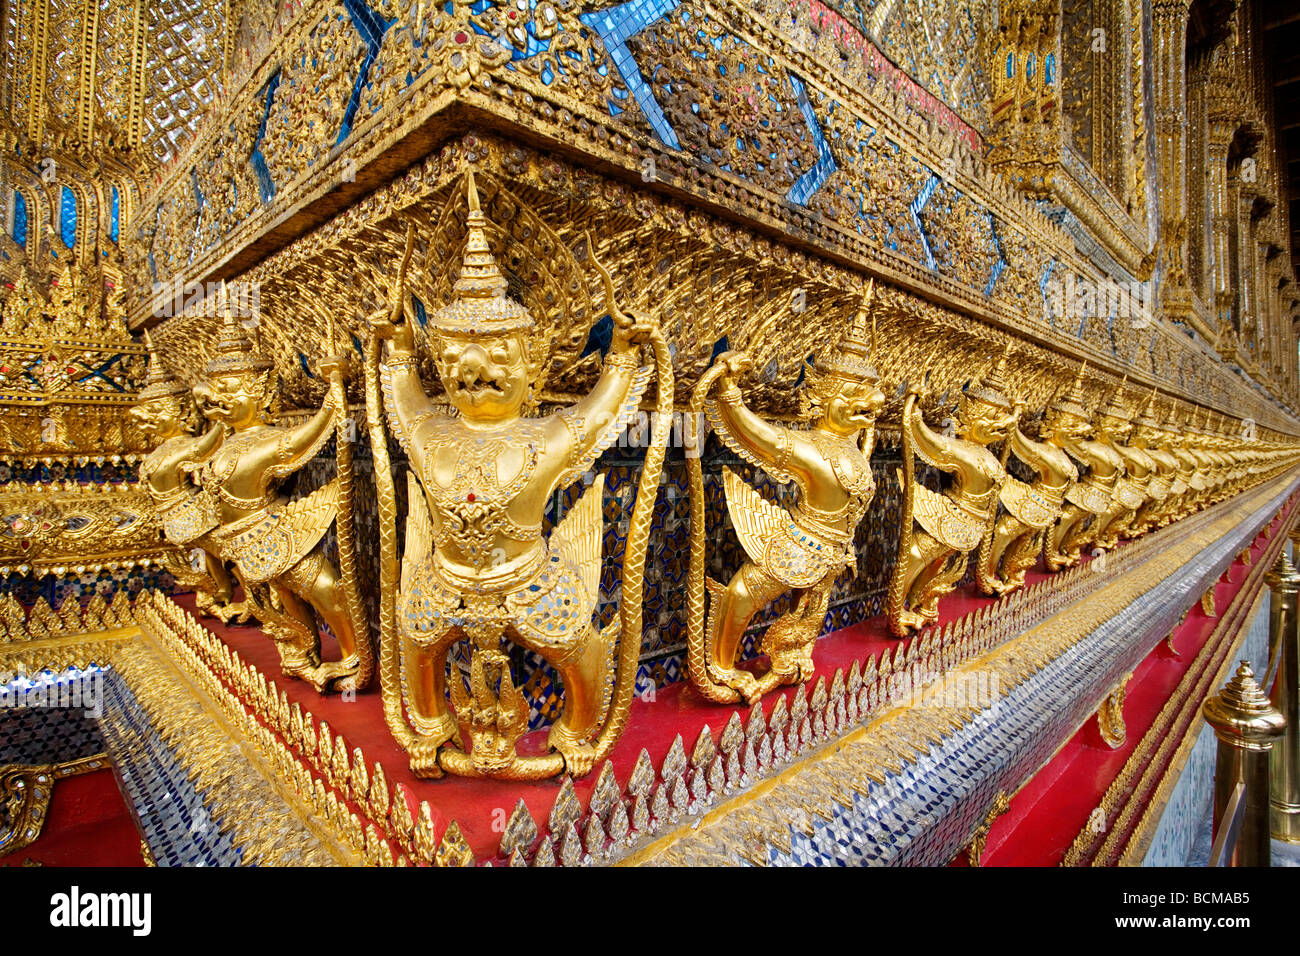 Gold ornamental patter statuettes Temple of the Emerald Buddha The Grand Palace Bangkok Thailand Stock Photo